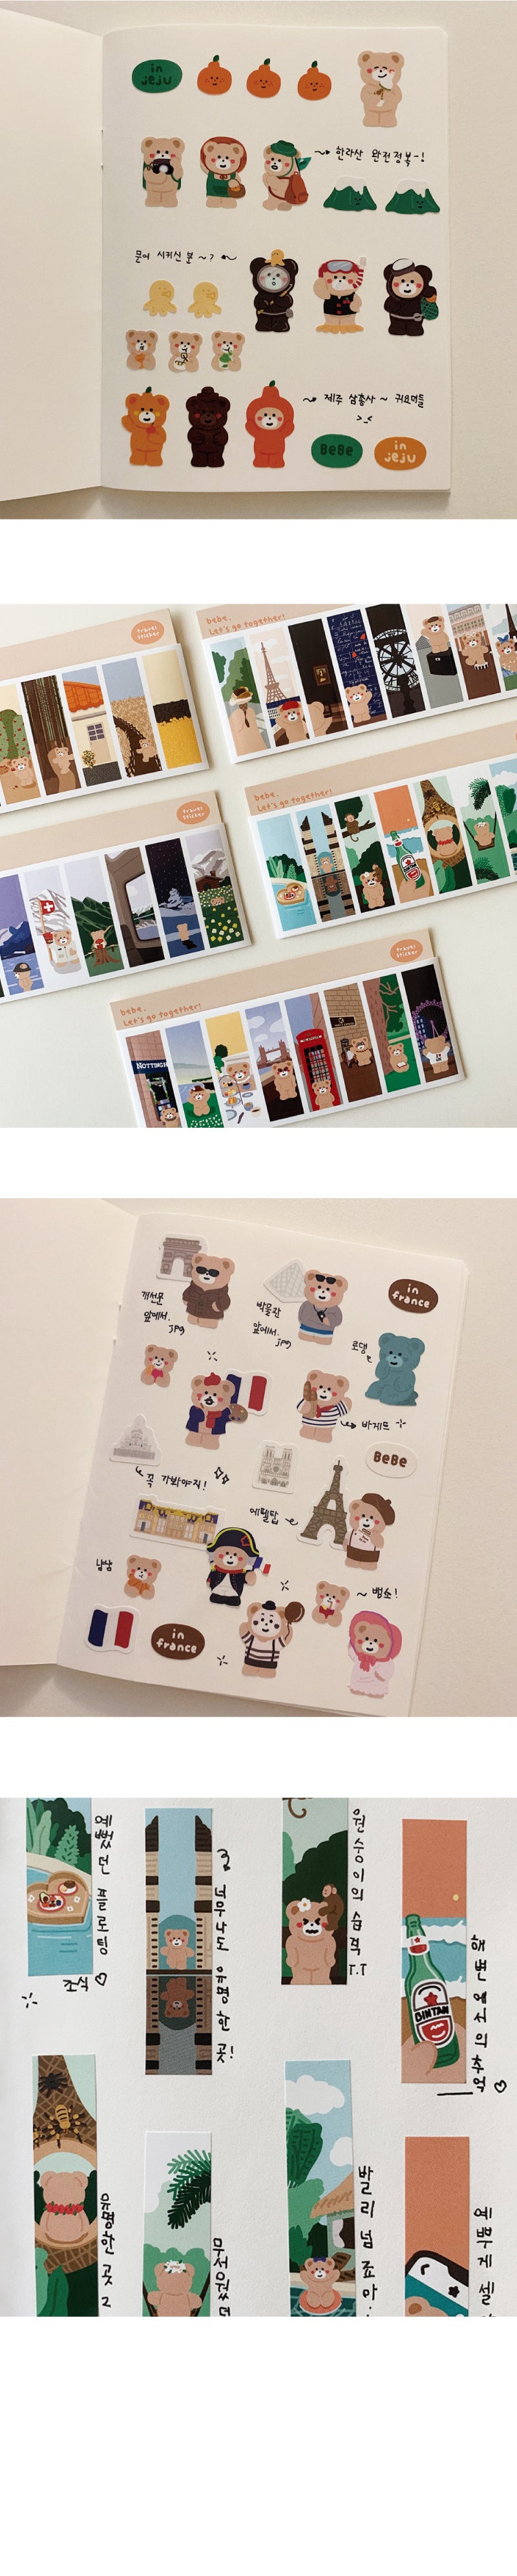 Diary Deco Sticker Pack Travel 6types